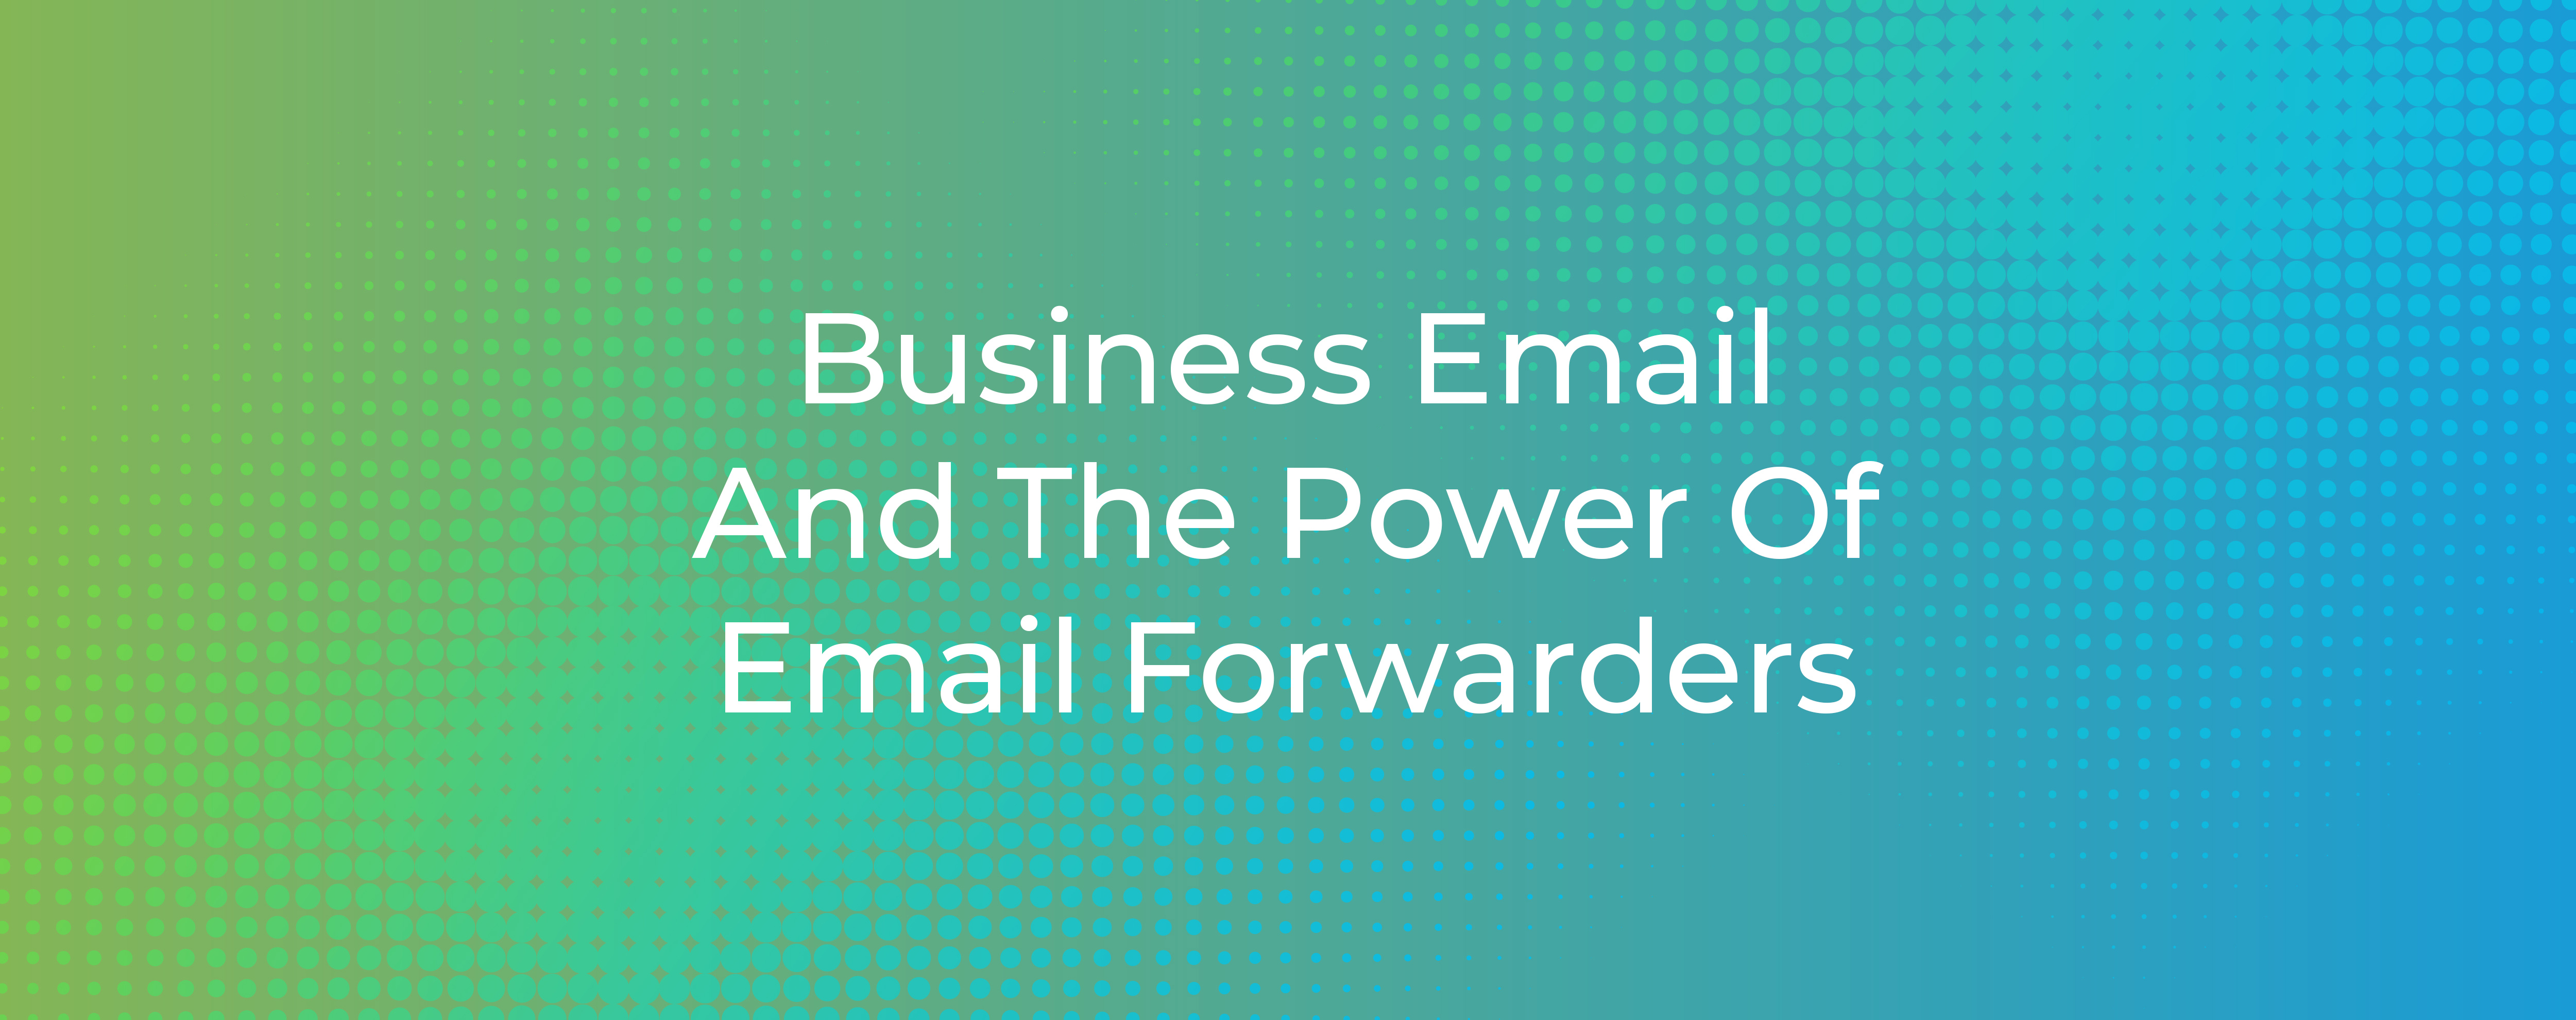 Business Email And The Power Of Email Forwarders